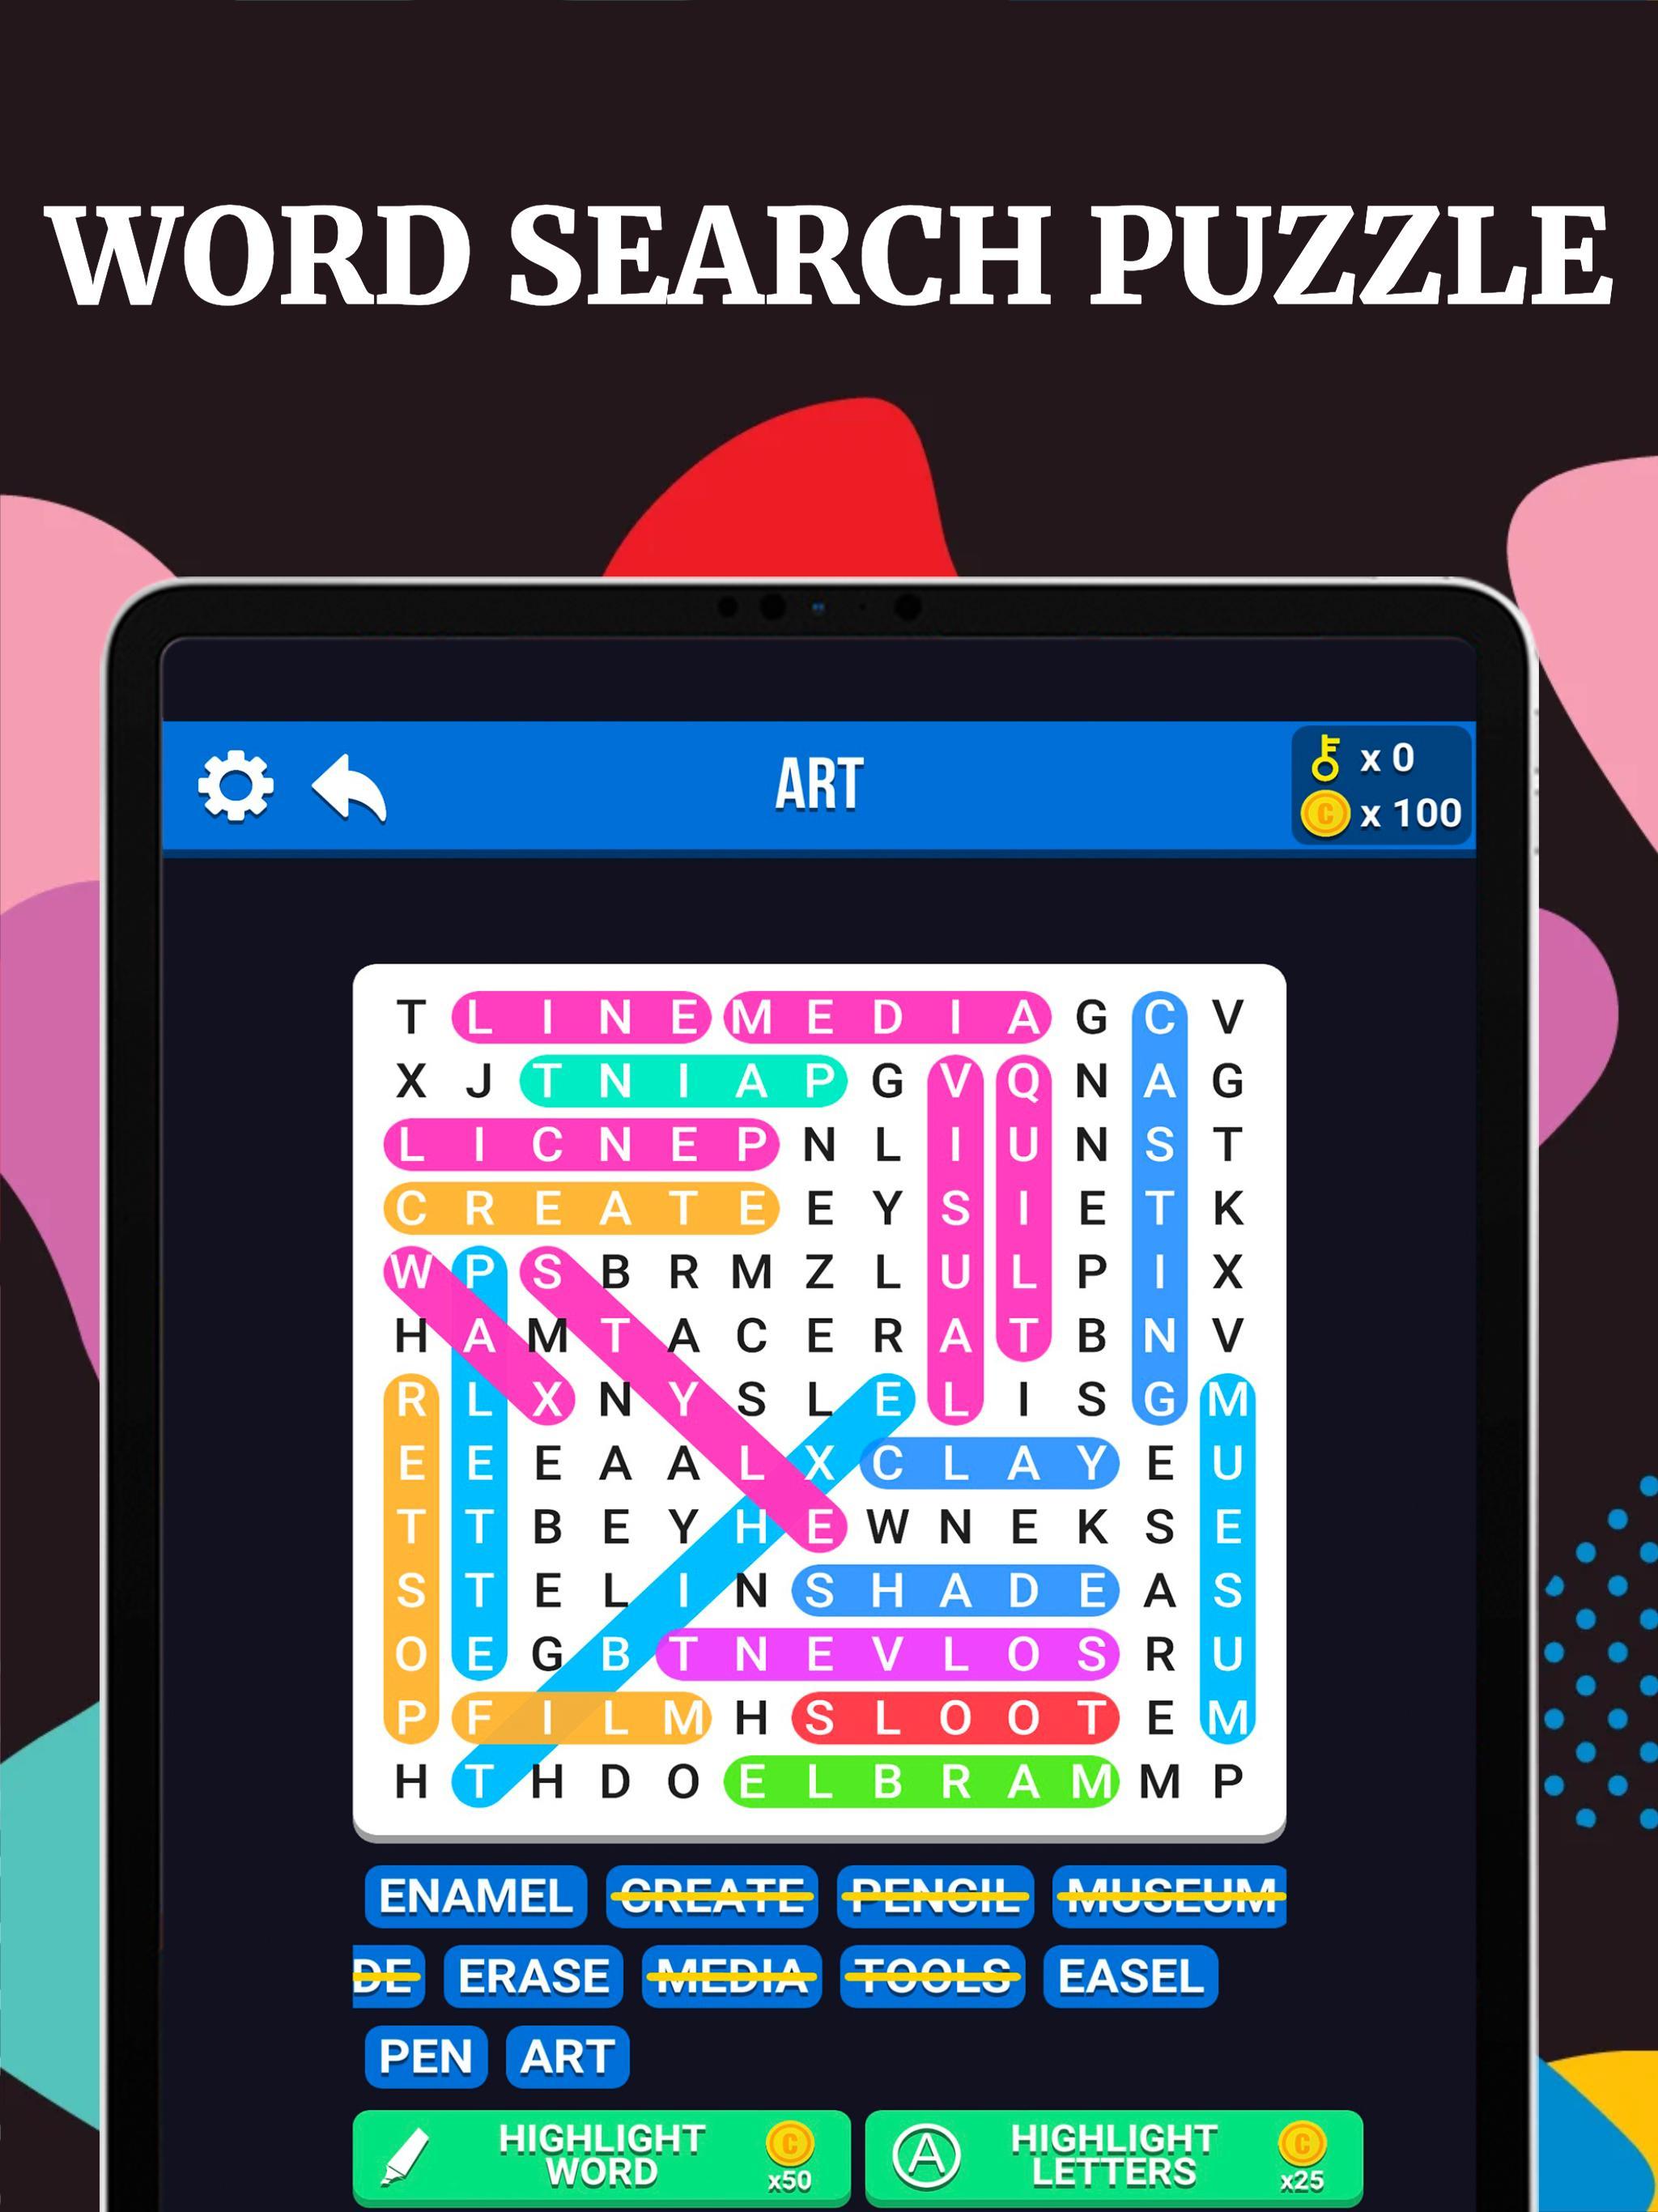 Free Word Search Puzzle - Crossword Puzzle Quest 1.0.8 Screenshot 7